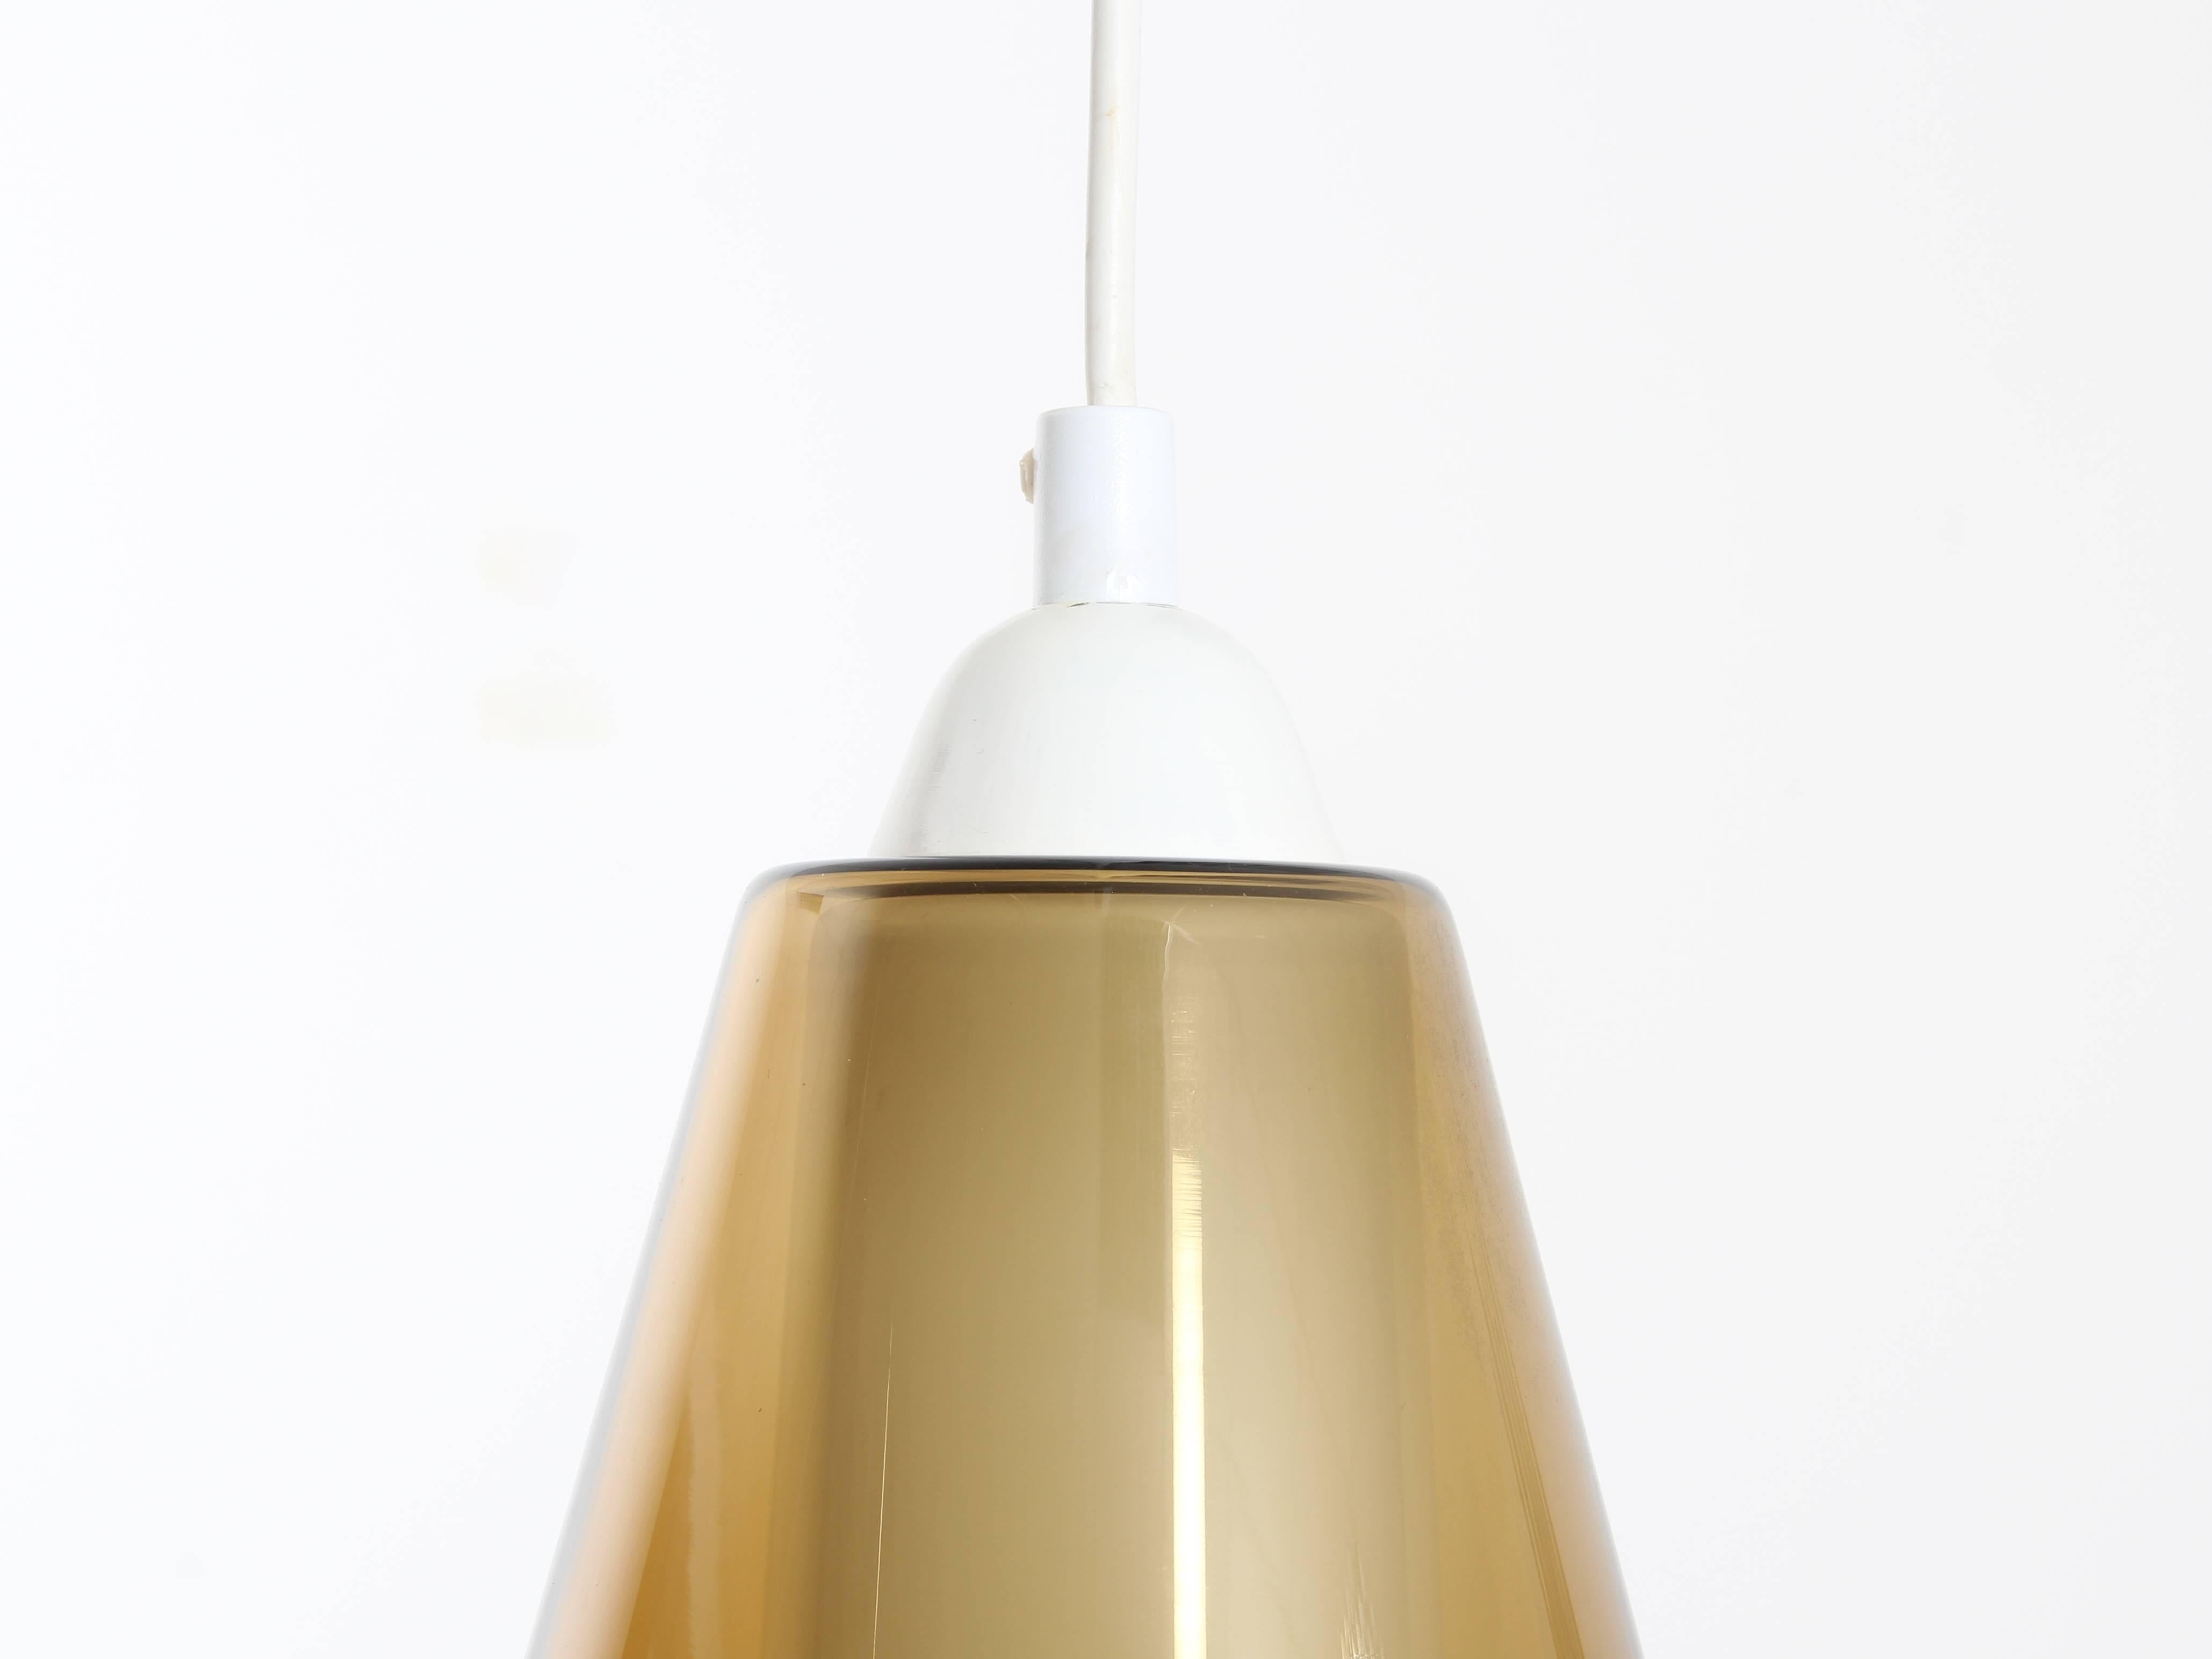 Scandinavian suspended smoked brown and opal glass. Rota model Jo Hammerborg. Works with standard bulbs E27.